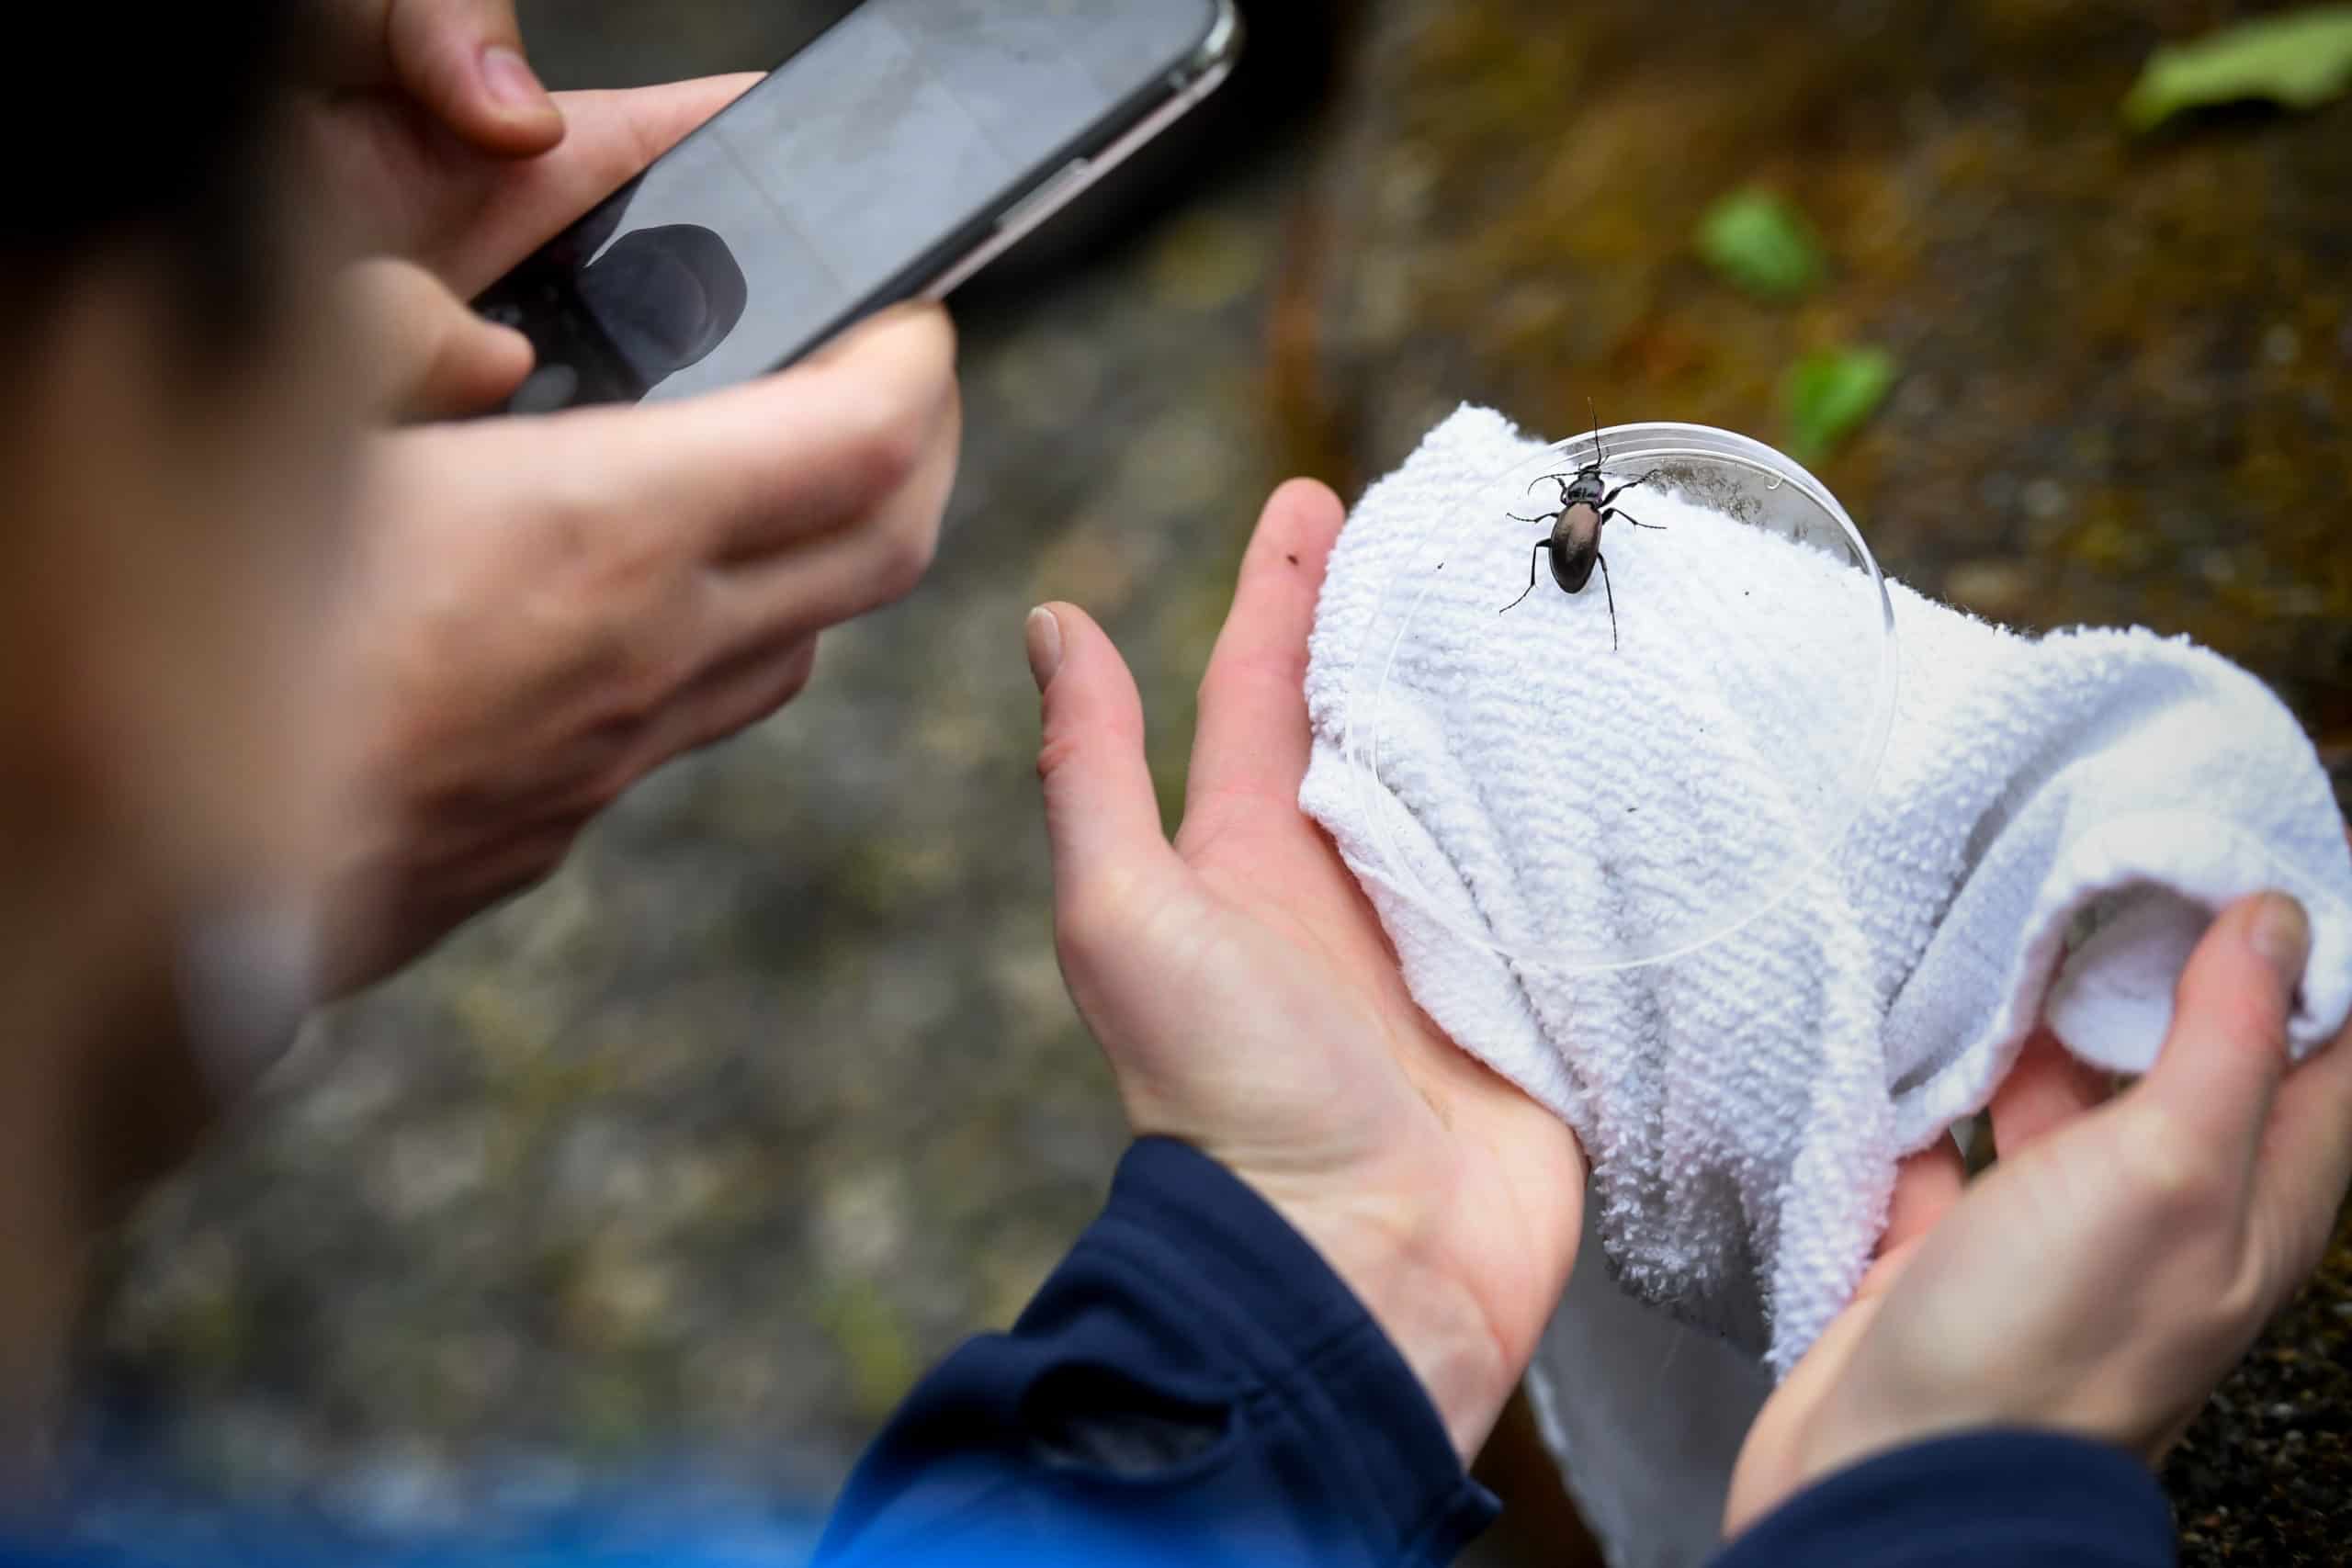 Hands hold an insect up to a smart phone to use an app to identify the insect